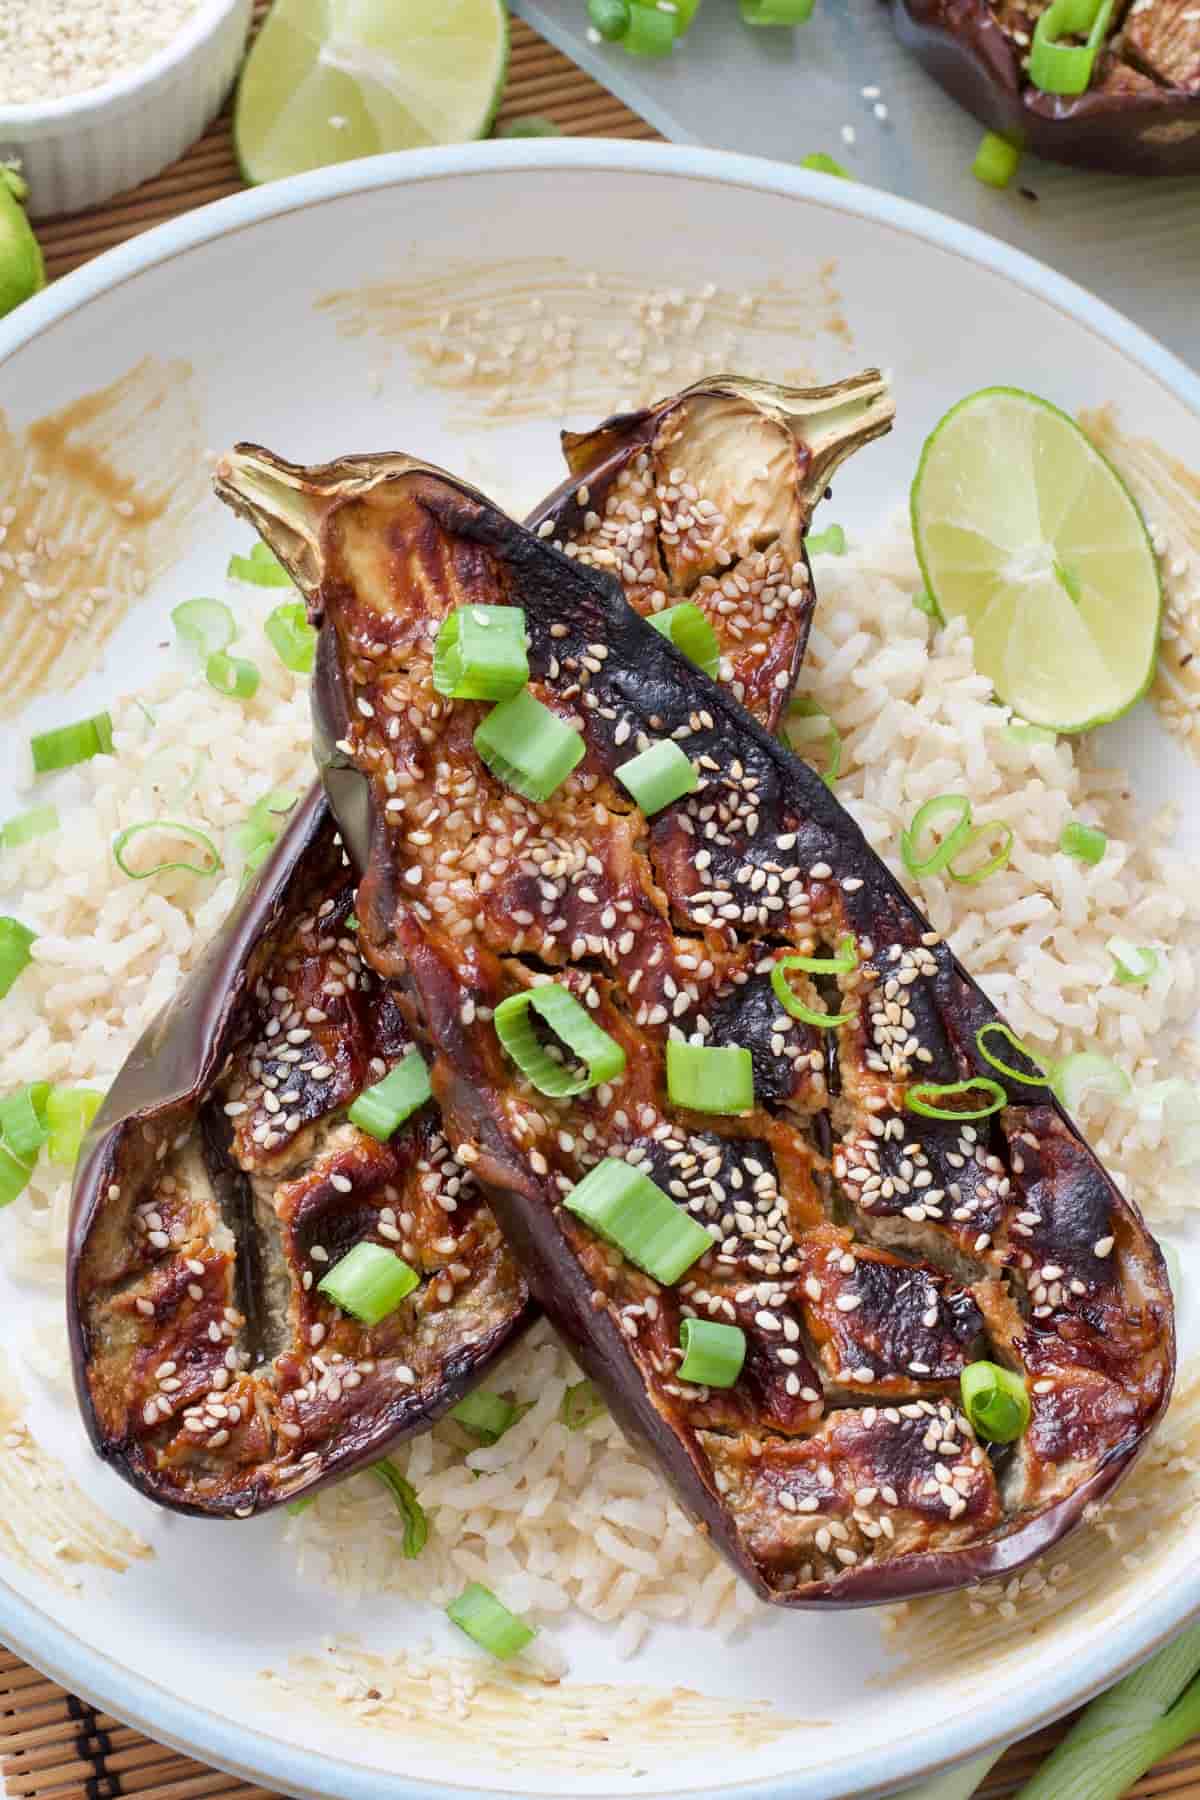 2 halves of miso aubergine on top of rice, spring onion slices on top.